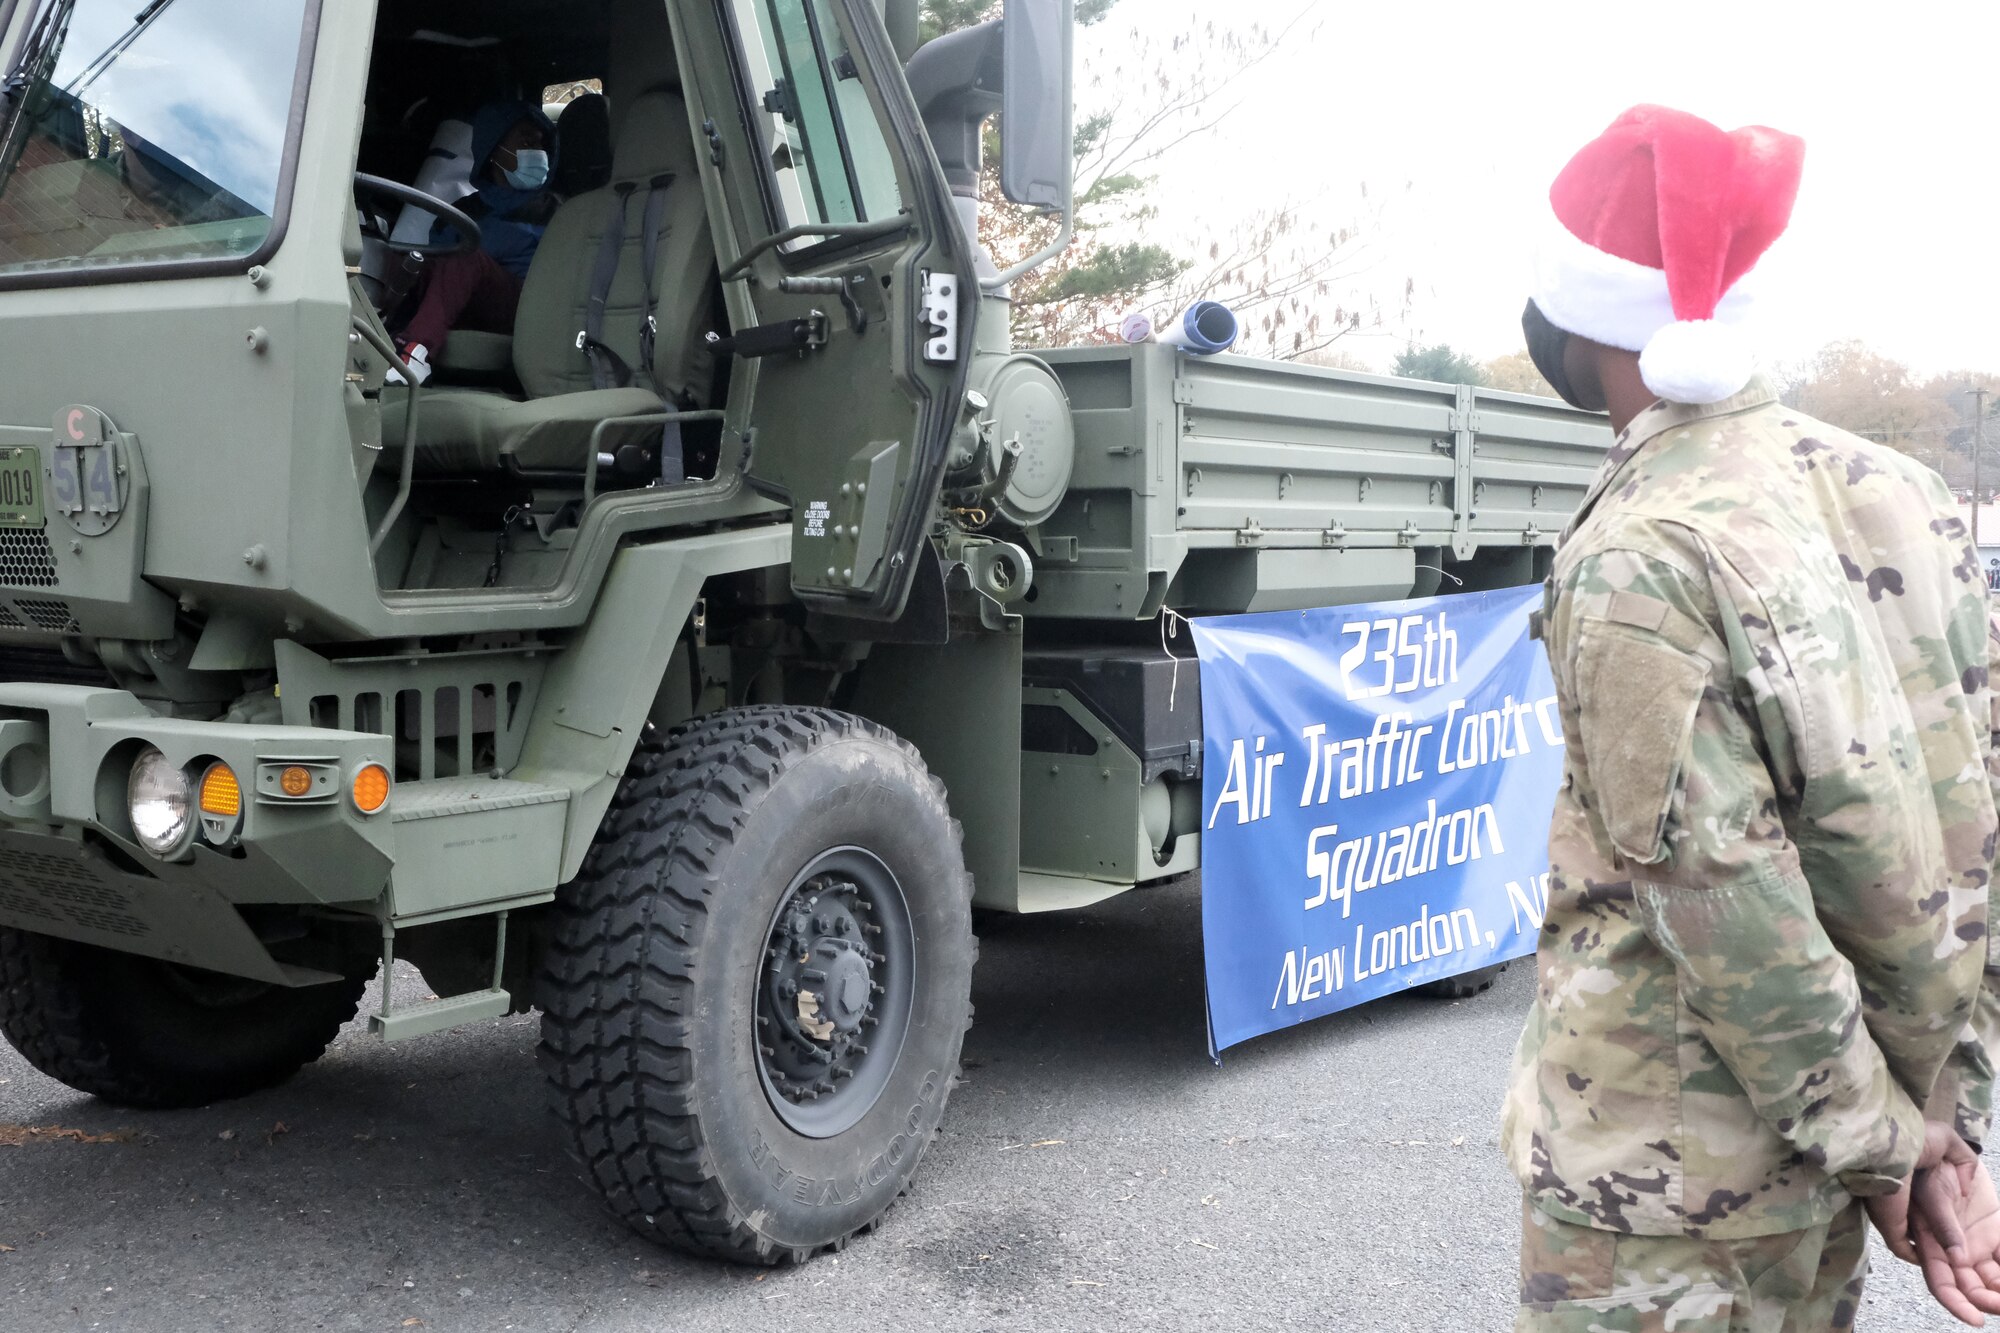 A five-ton truck, M10-35, used by the 235th Air Traffic Control Squadron for hauling beacons onto a flight line, is set-up for Operation Santa Claus held at Oakboro Elementary School in Oakboro, N.C. Dec. 13, 2020. The Chapter 7 organization within the North Carolina Air National Guard hosts the Annual Operation Santa Claus event as a way to reach out to the community and spread holiday cheer and spirit. Chapter 7 and volunteers passed out nearly 100 boxes of food donated by the local Food Lion as well as 50 presents designated to students within the school.